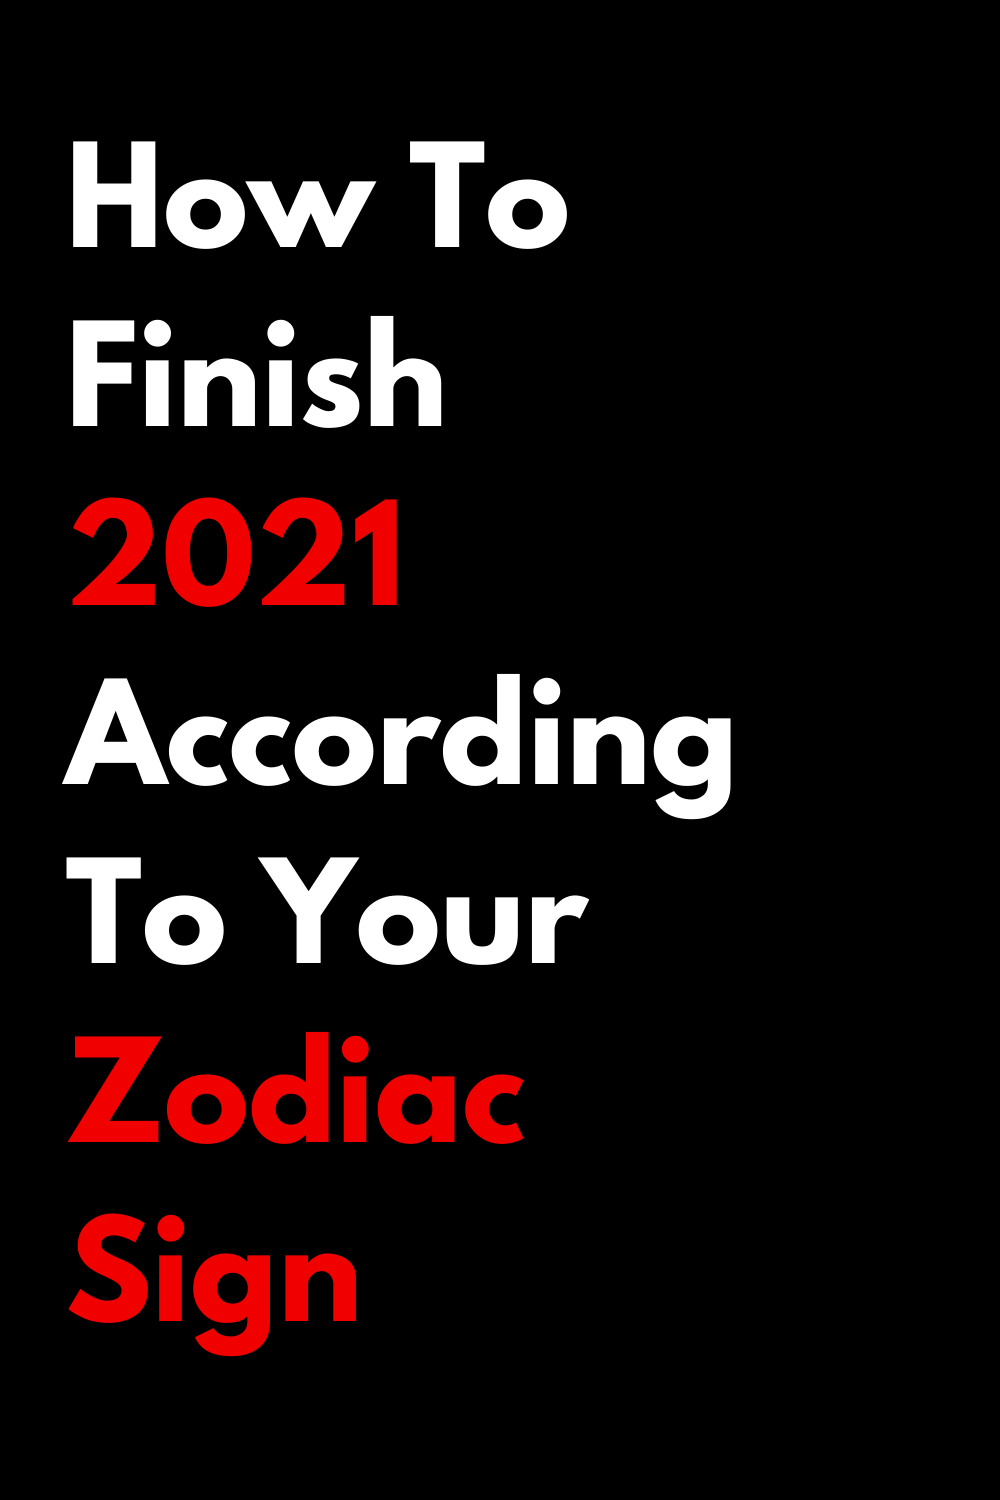 How To Finish 2021 According To Your Zodiac Sign